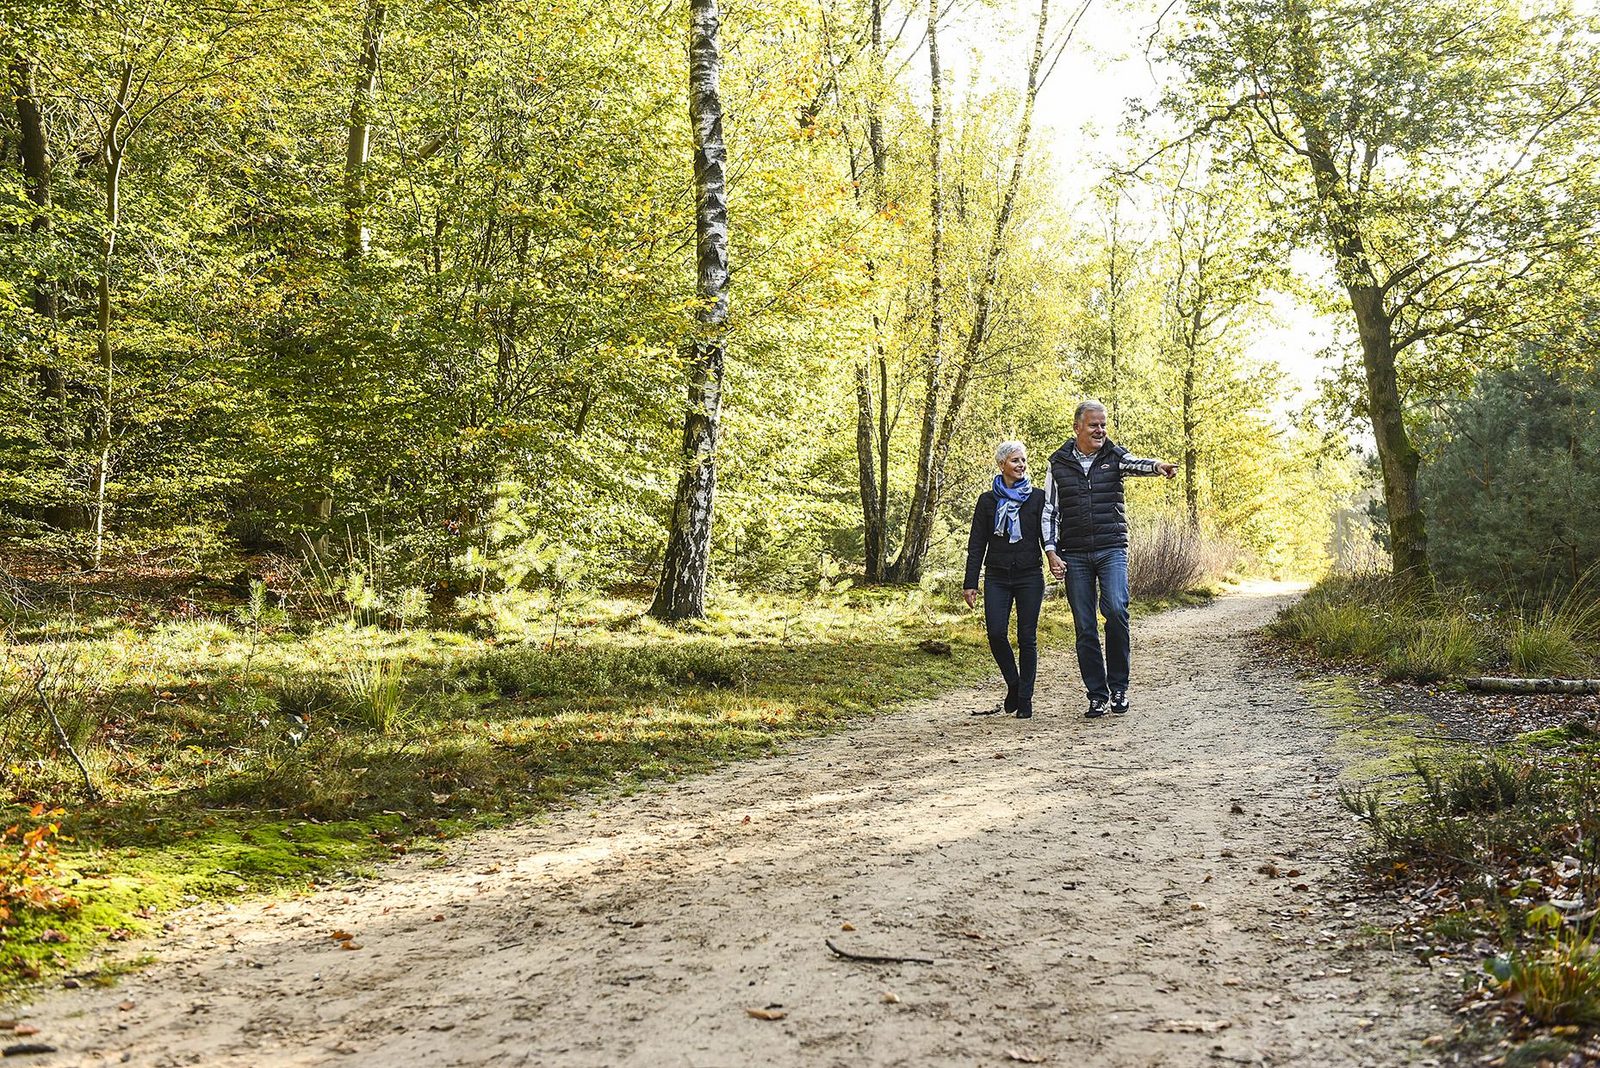 Our tips for a hike in Lage Vuursche